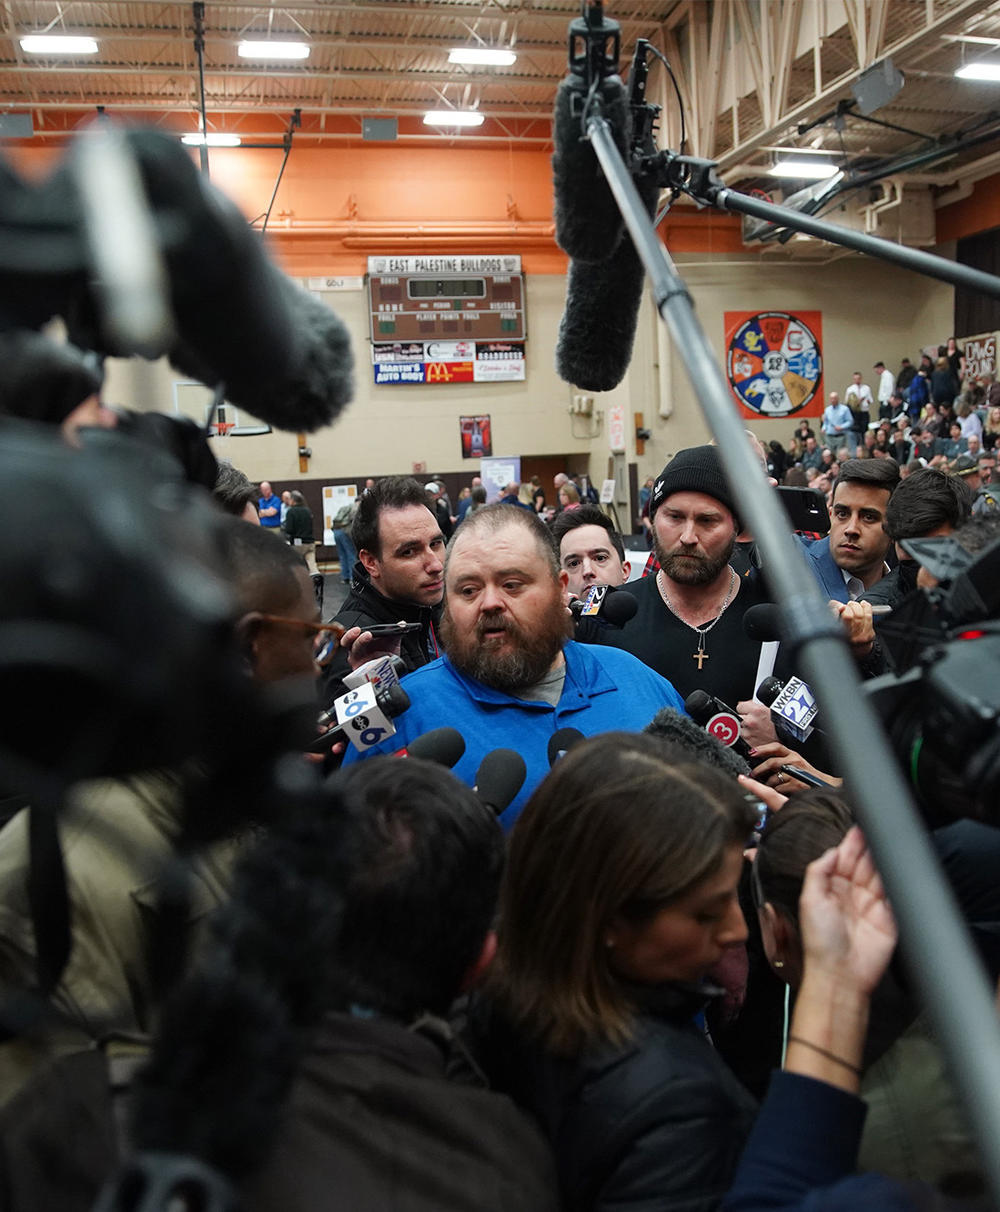 East Palestine Mayor Trent Conaway talks to reporters during a contentious community meeting on Feb. 15, 2023, about the fiery, toxic train derailment that occurred in the Ohio community earlier that month. Full story <a href=